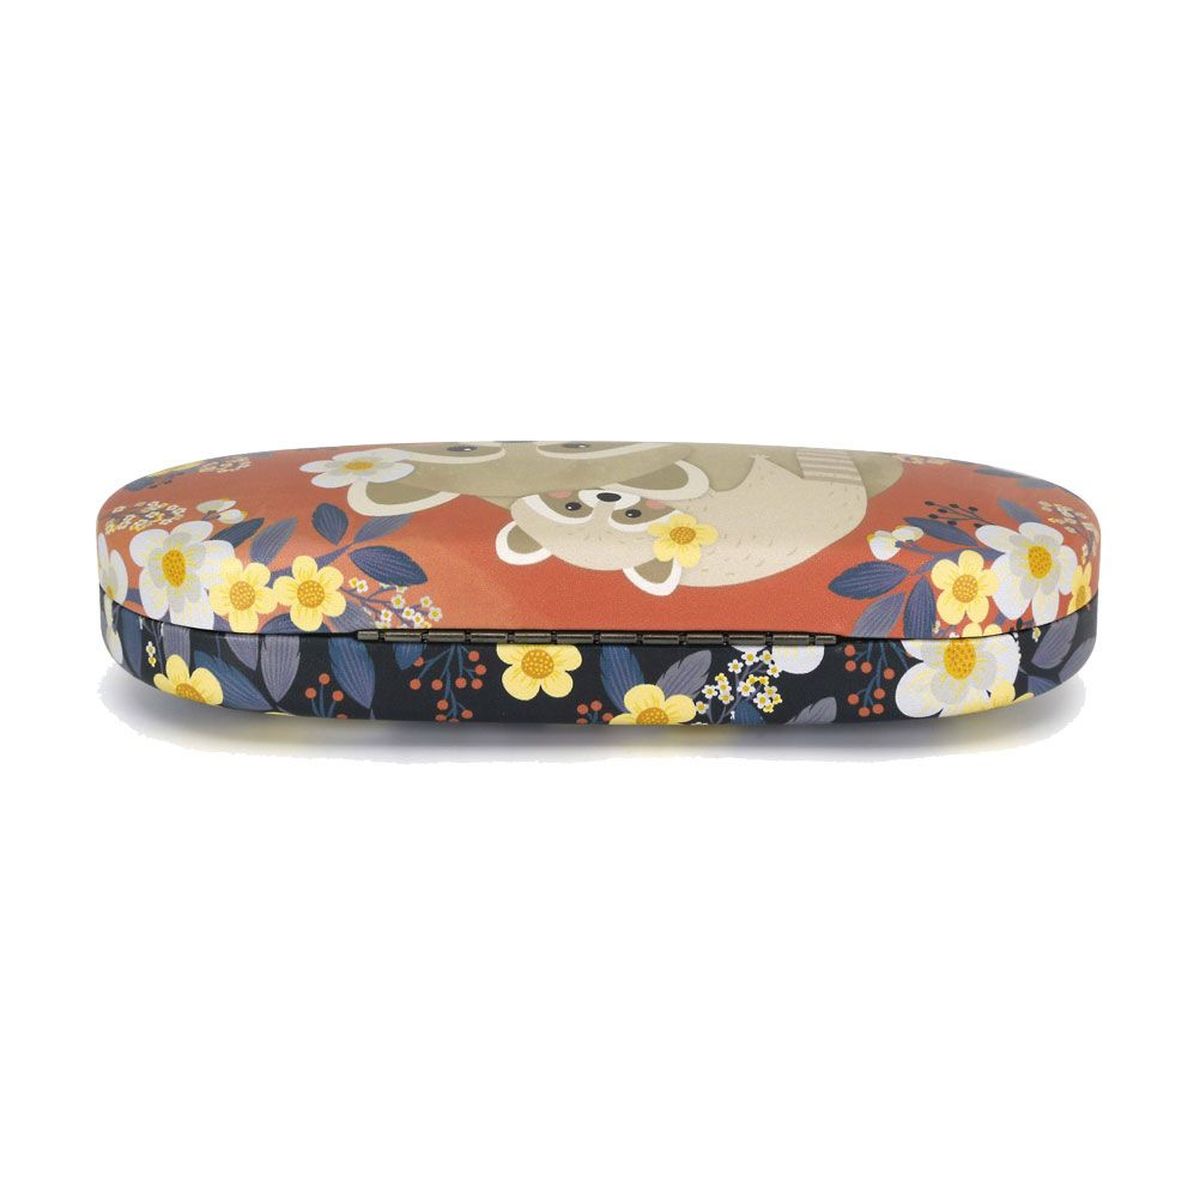 Forest Friends Glasses case - Racoons